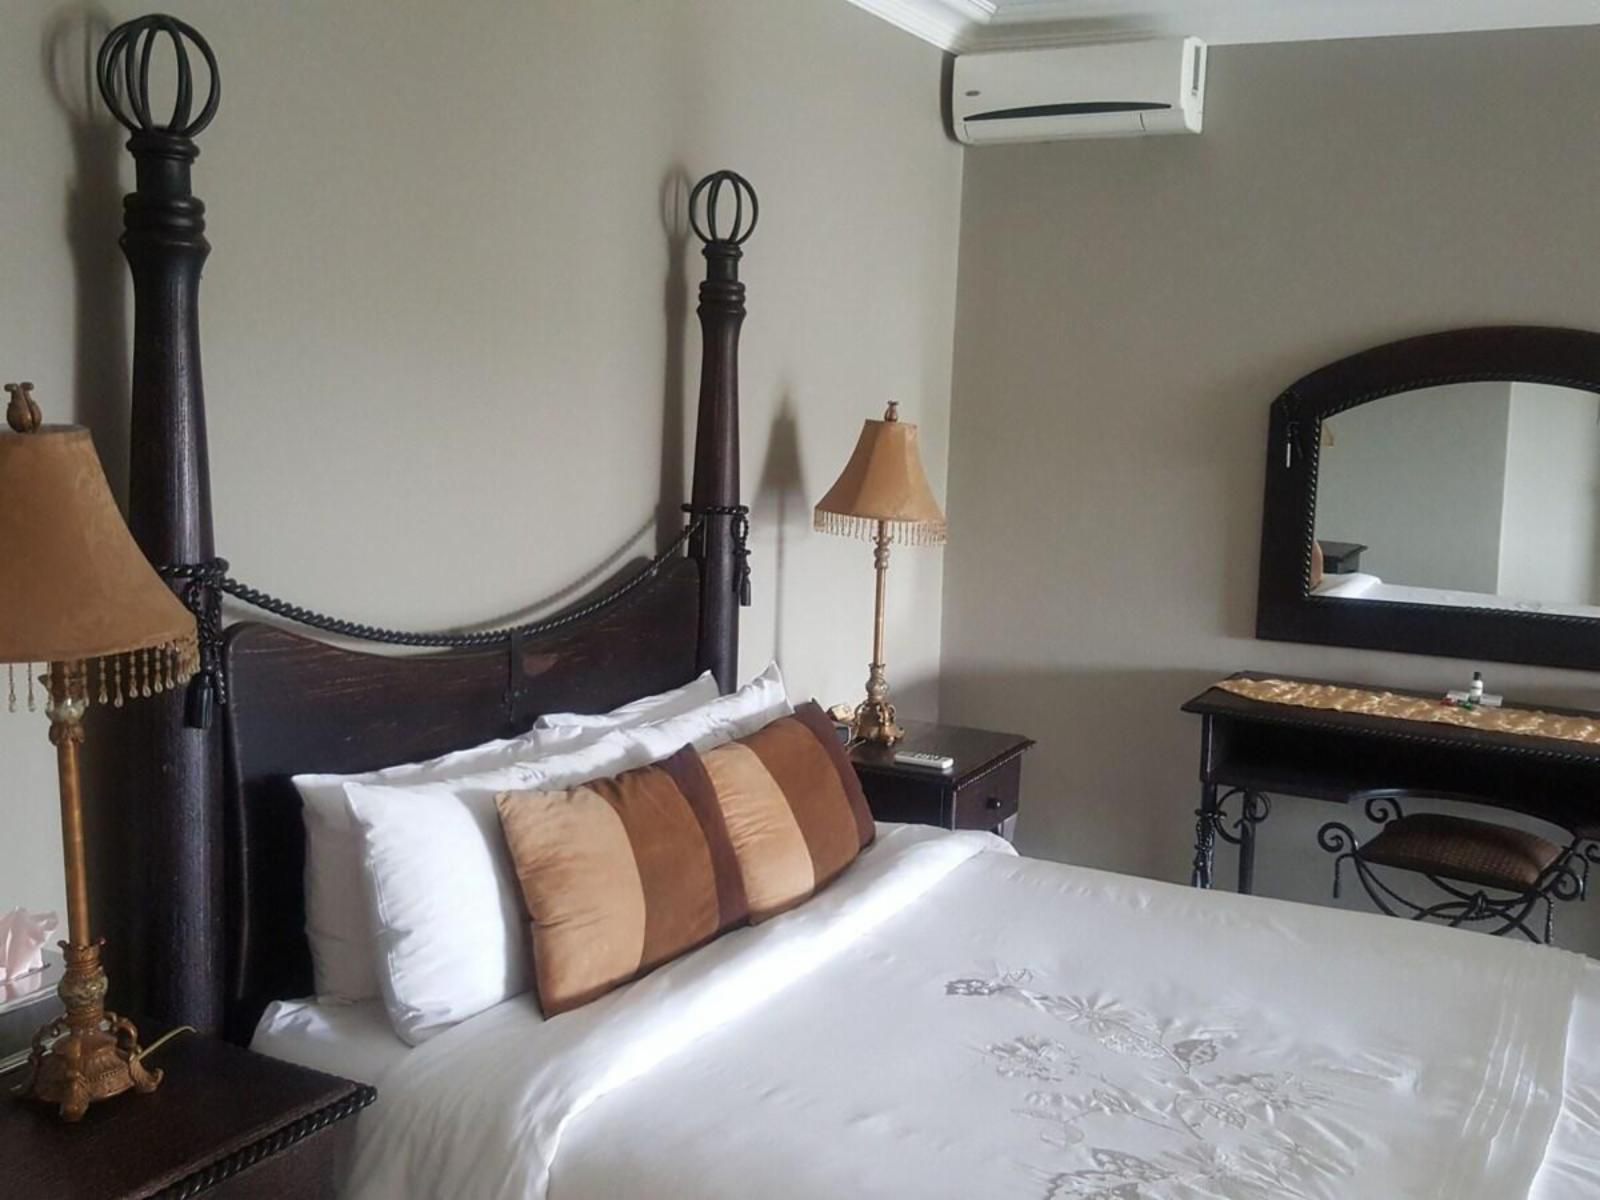 Fa Trez Guest House And Spa Faerie Glen Pretoria Tshwane Gauteng South Africa Unsaturated, Bedroom